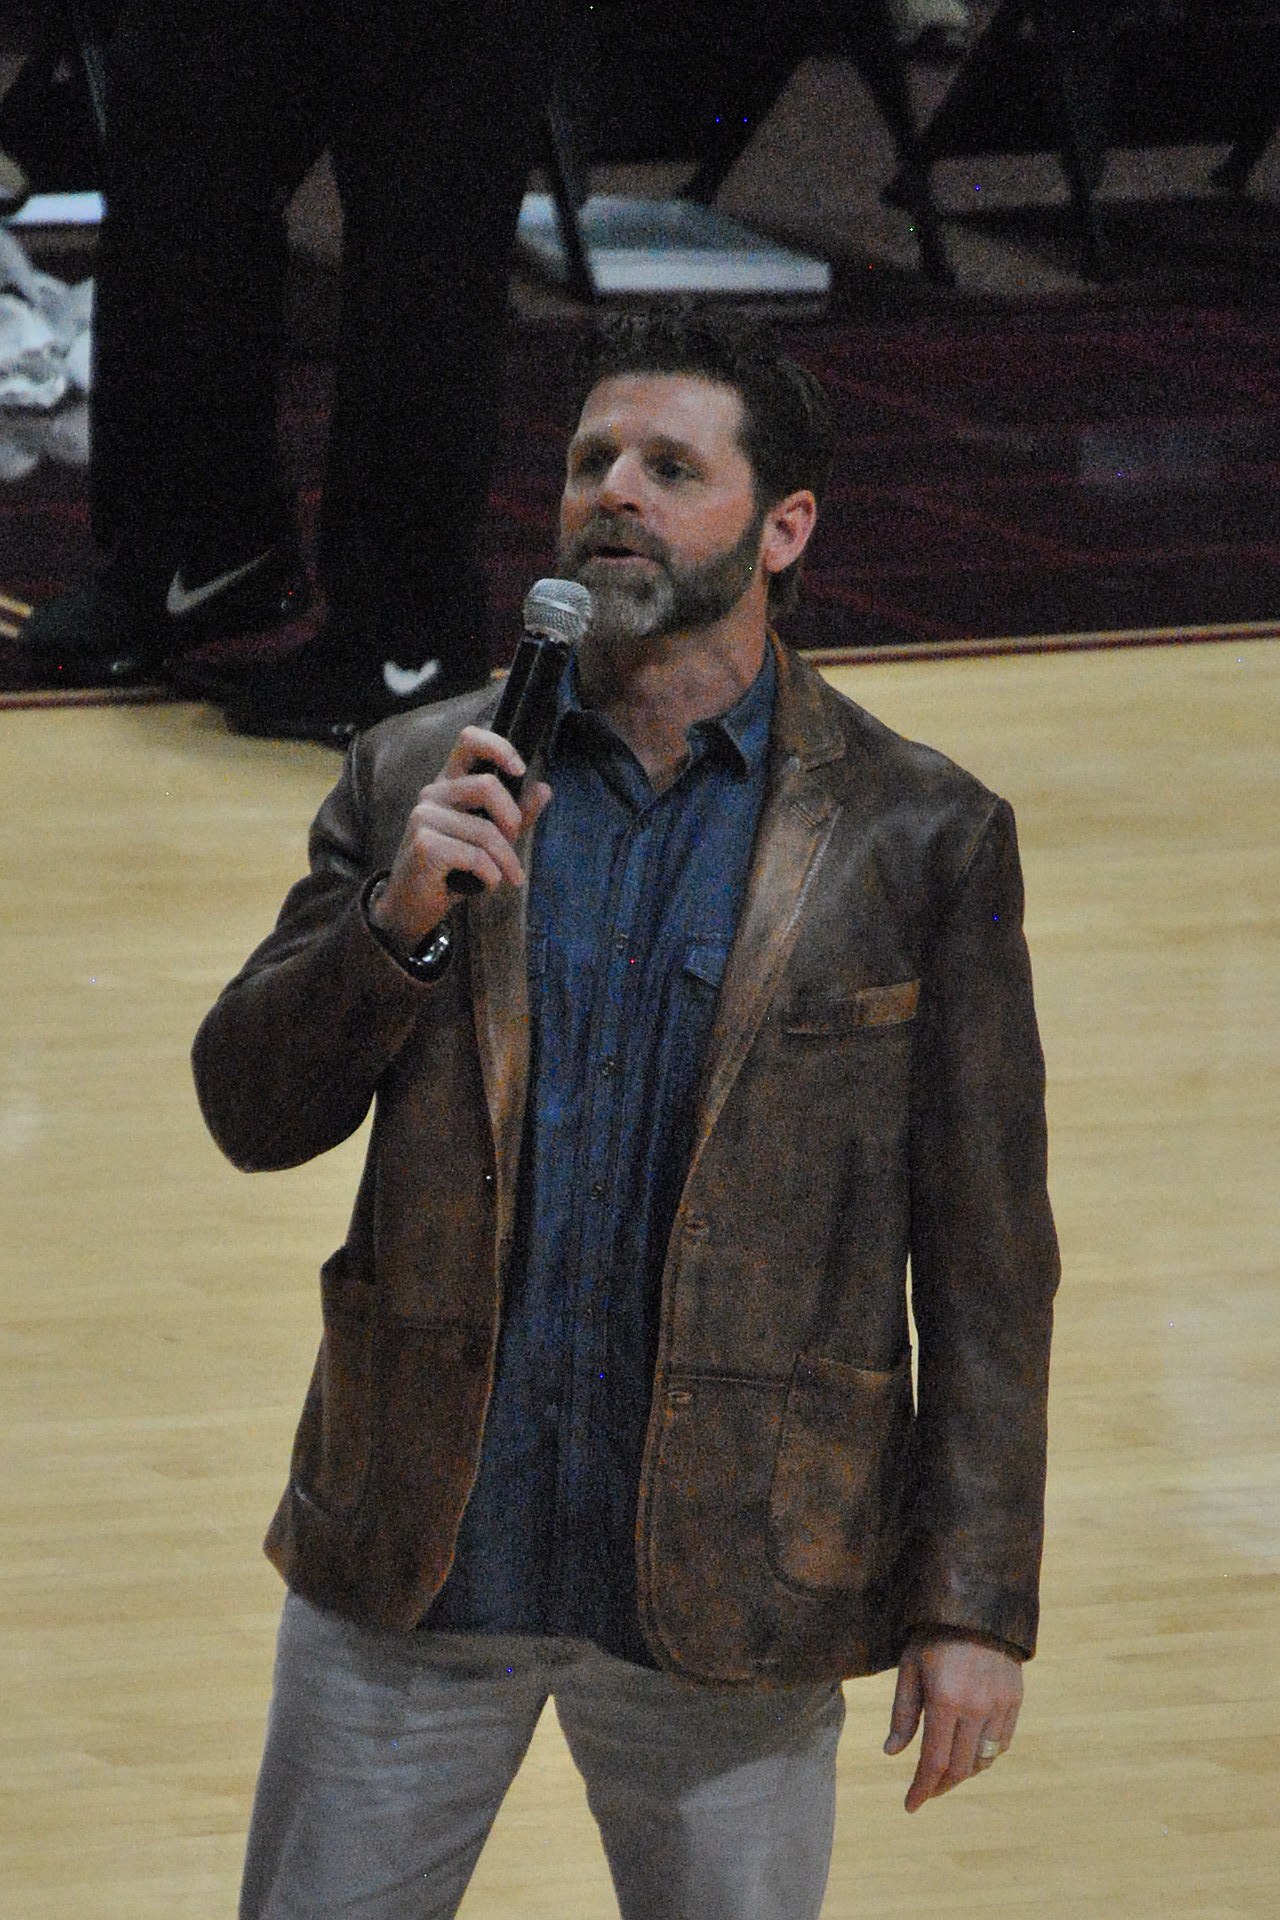 Virginia Tech head football coach Brent Pry holding a microphone standing on the basketball court in Cassell Coliseum.